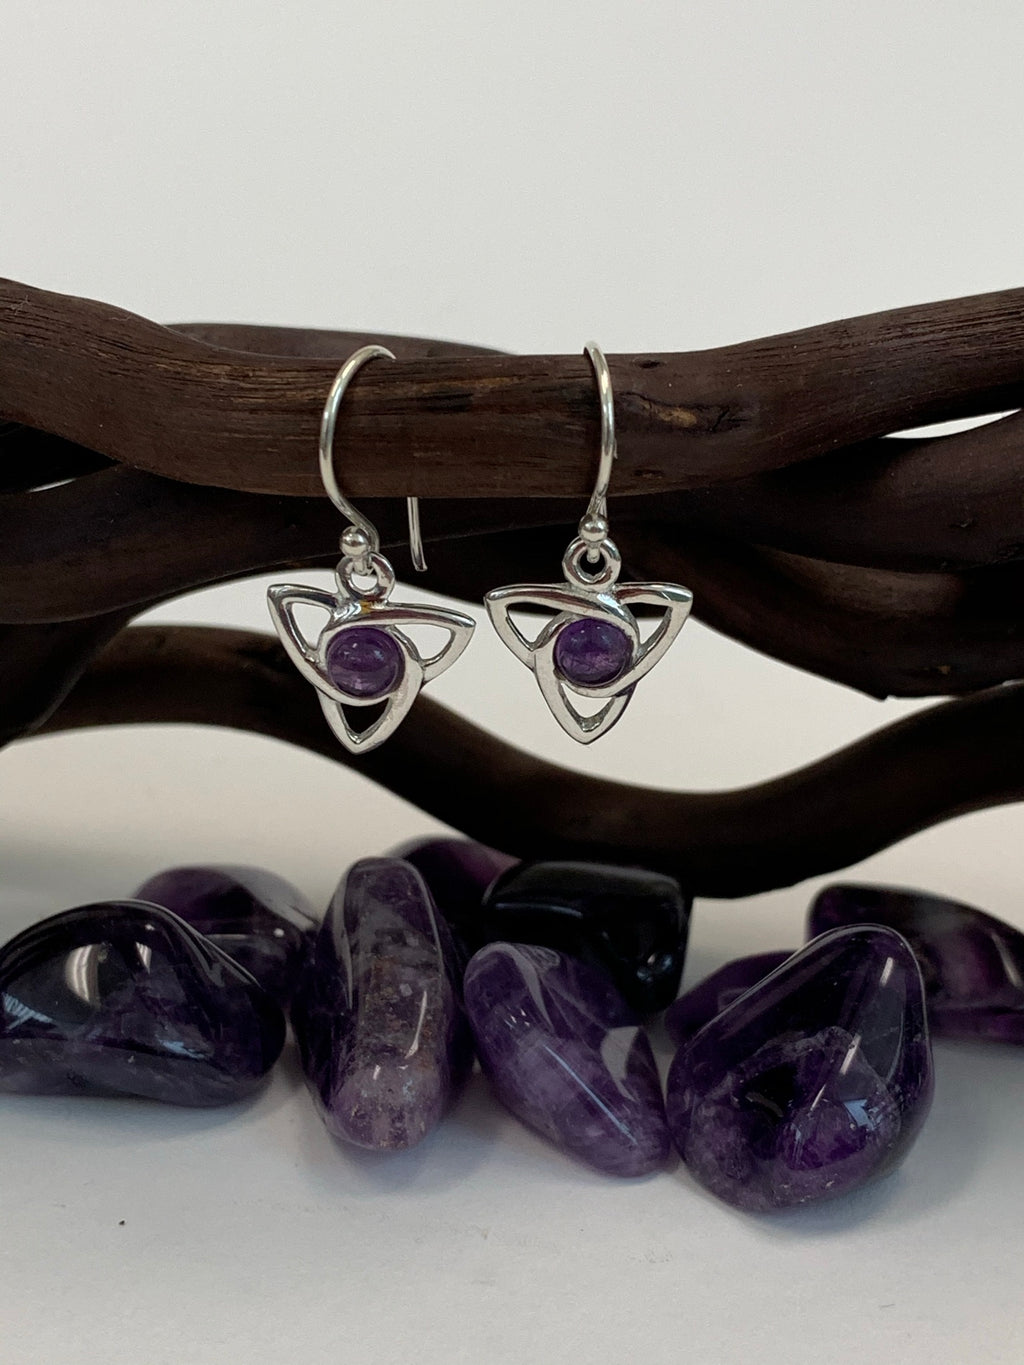 Round amethyst gemstones (cabs, not faceted) sit in the middle of a sterling silver Celtic trinity knot (or triquetra). These earrings are lightweight, have wires, not posts and are approximately 1¼" long.